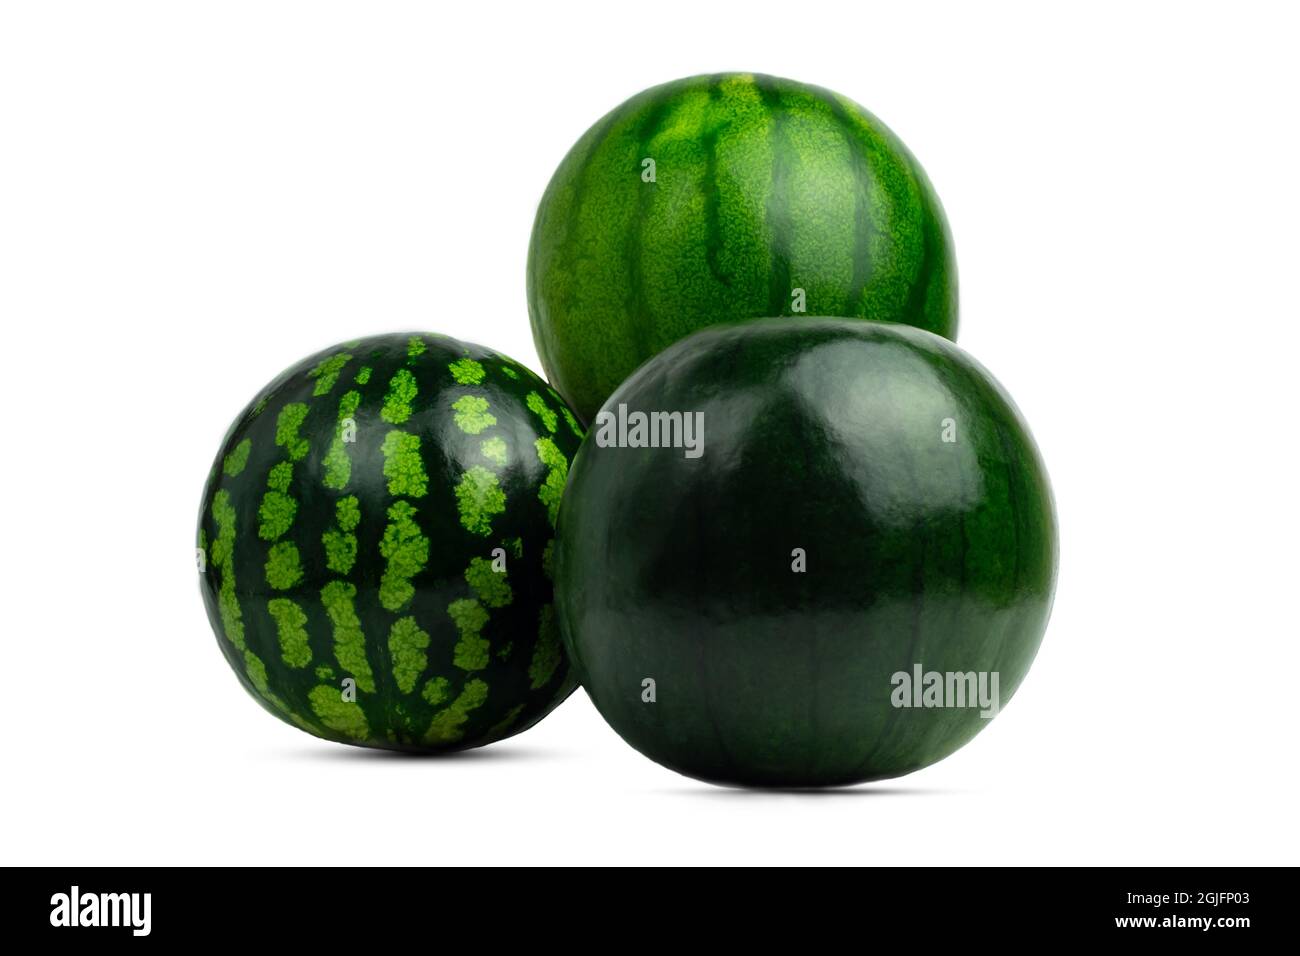 group of three ripe watermelons of different varieties, green and striped on a white background. Isolated. Direct view. Harvest. Stock Photo